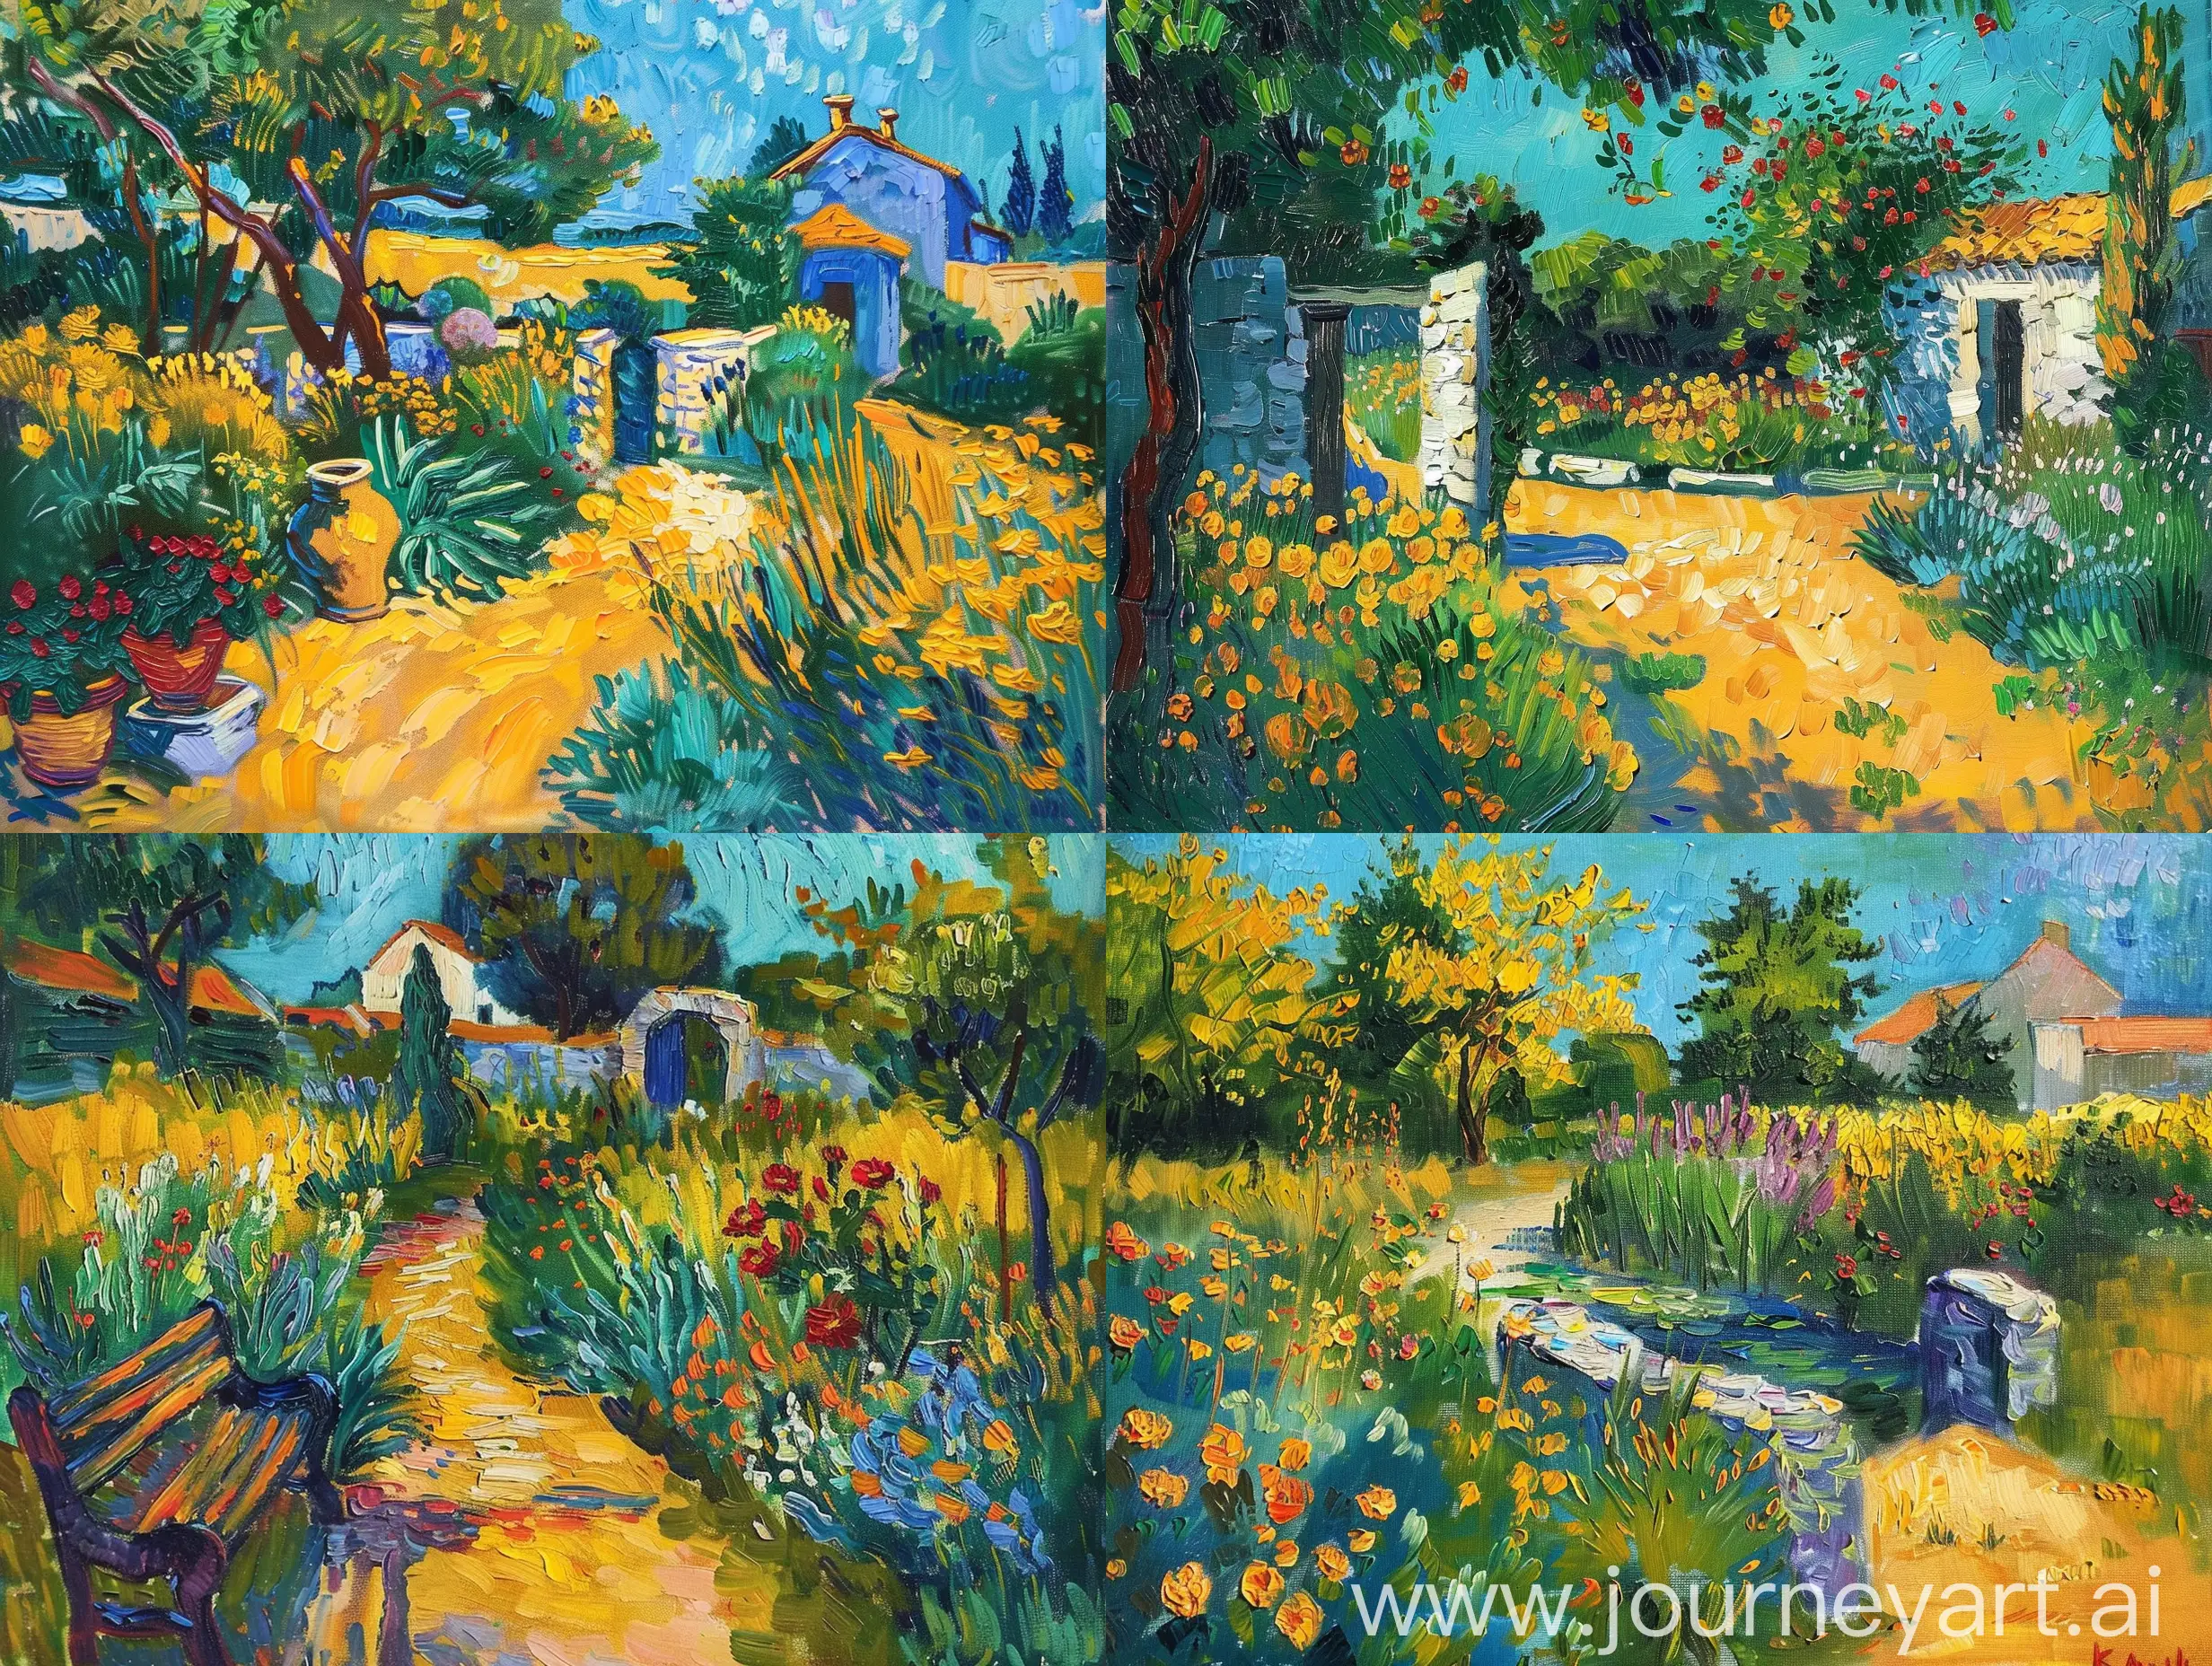 oil painting of a live scene garden in van gogh style